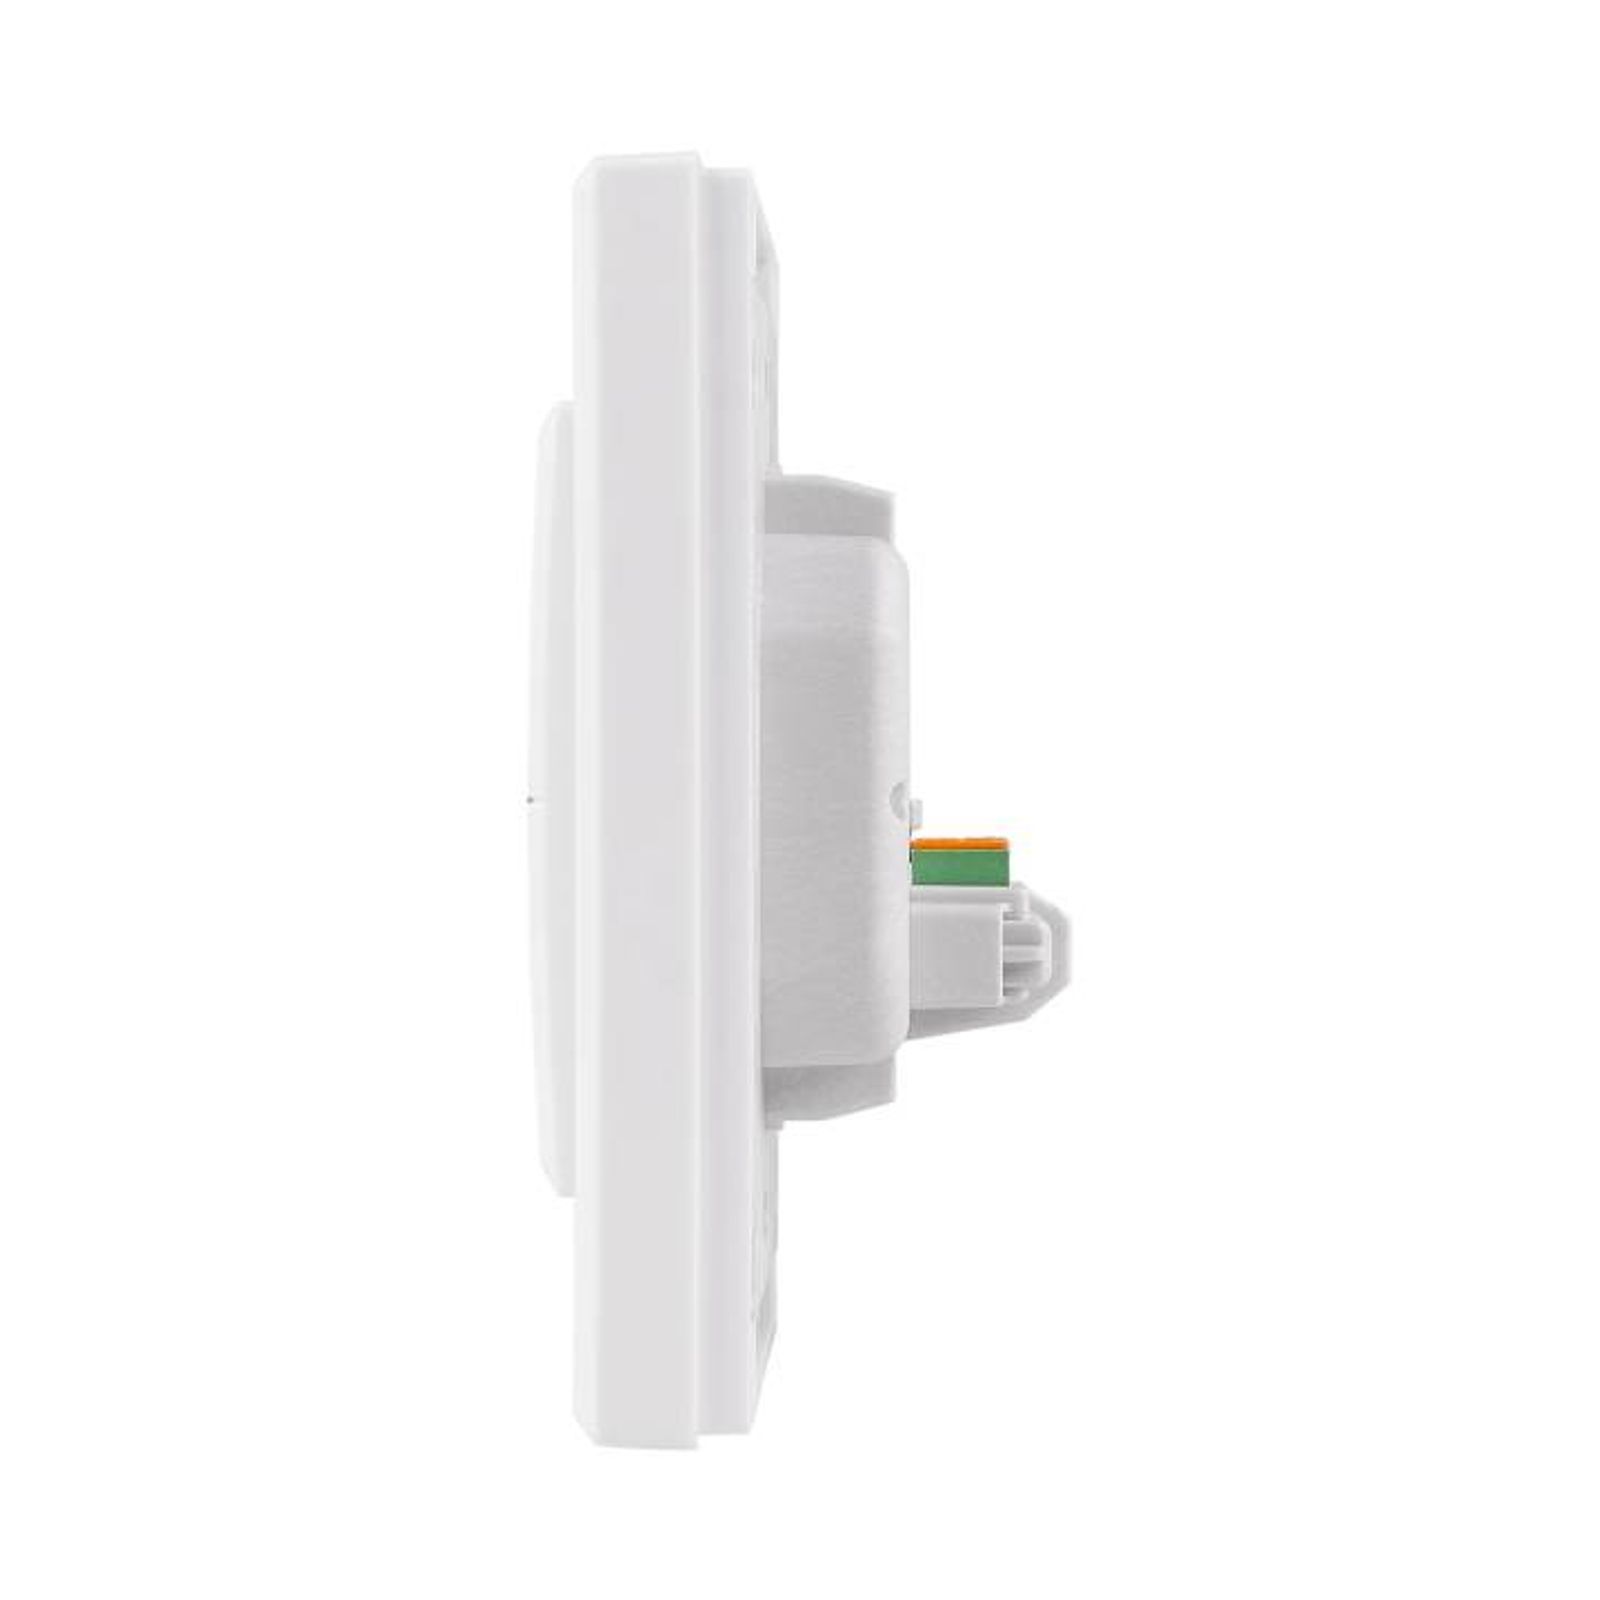 Homematic IP Wired Smart Home Wandtaster HmIPW-WRC2 - 2-fach